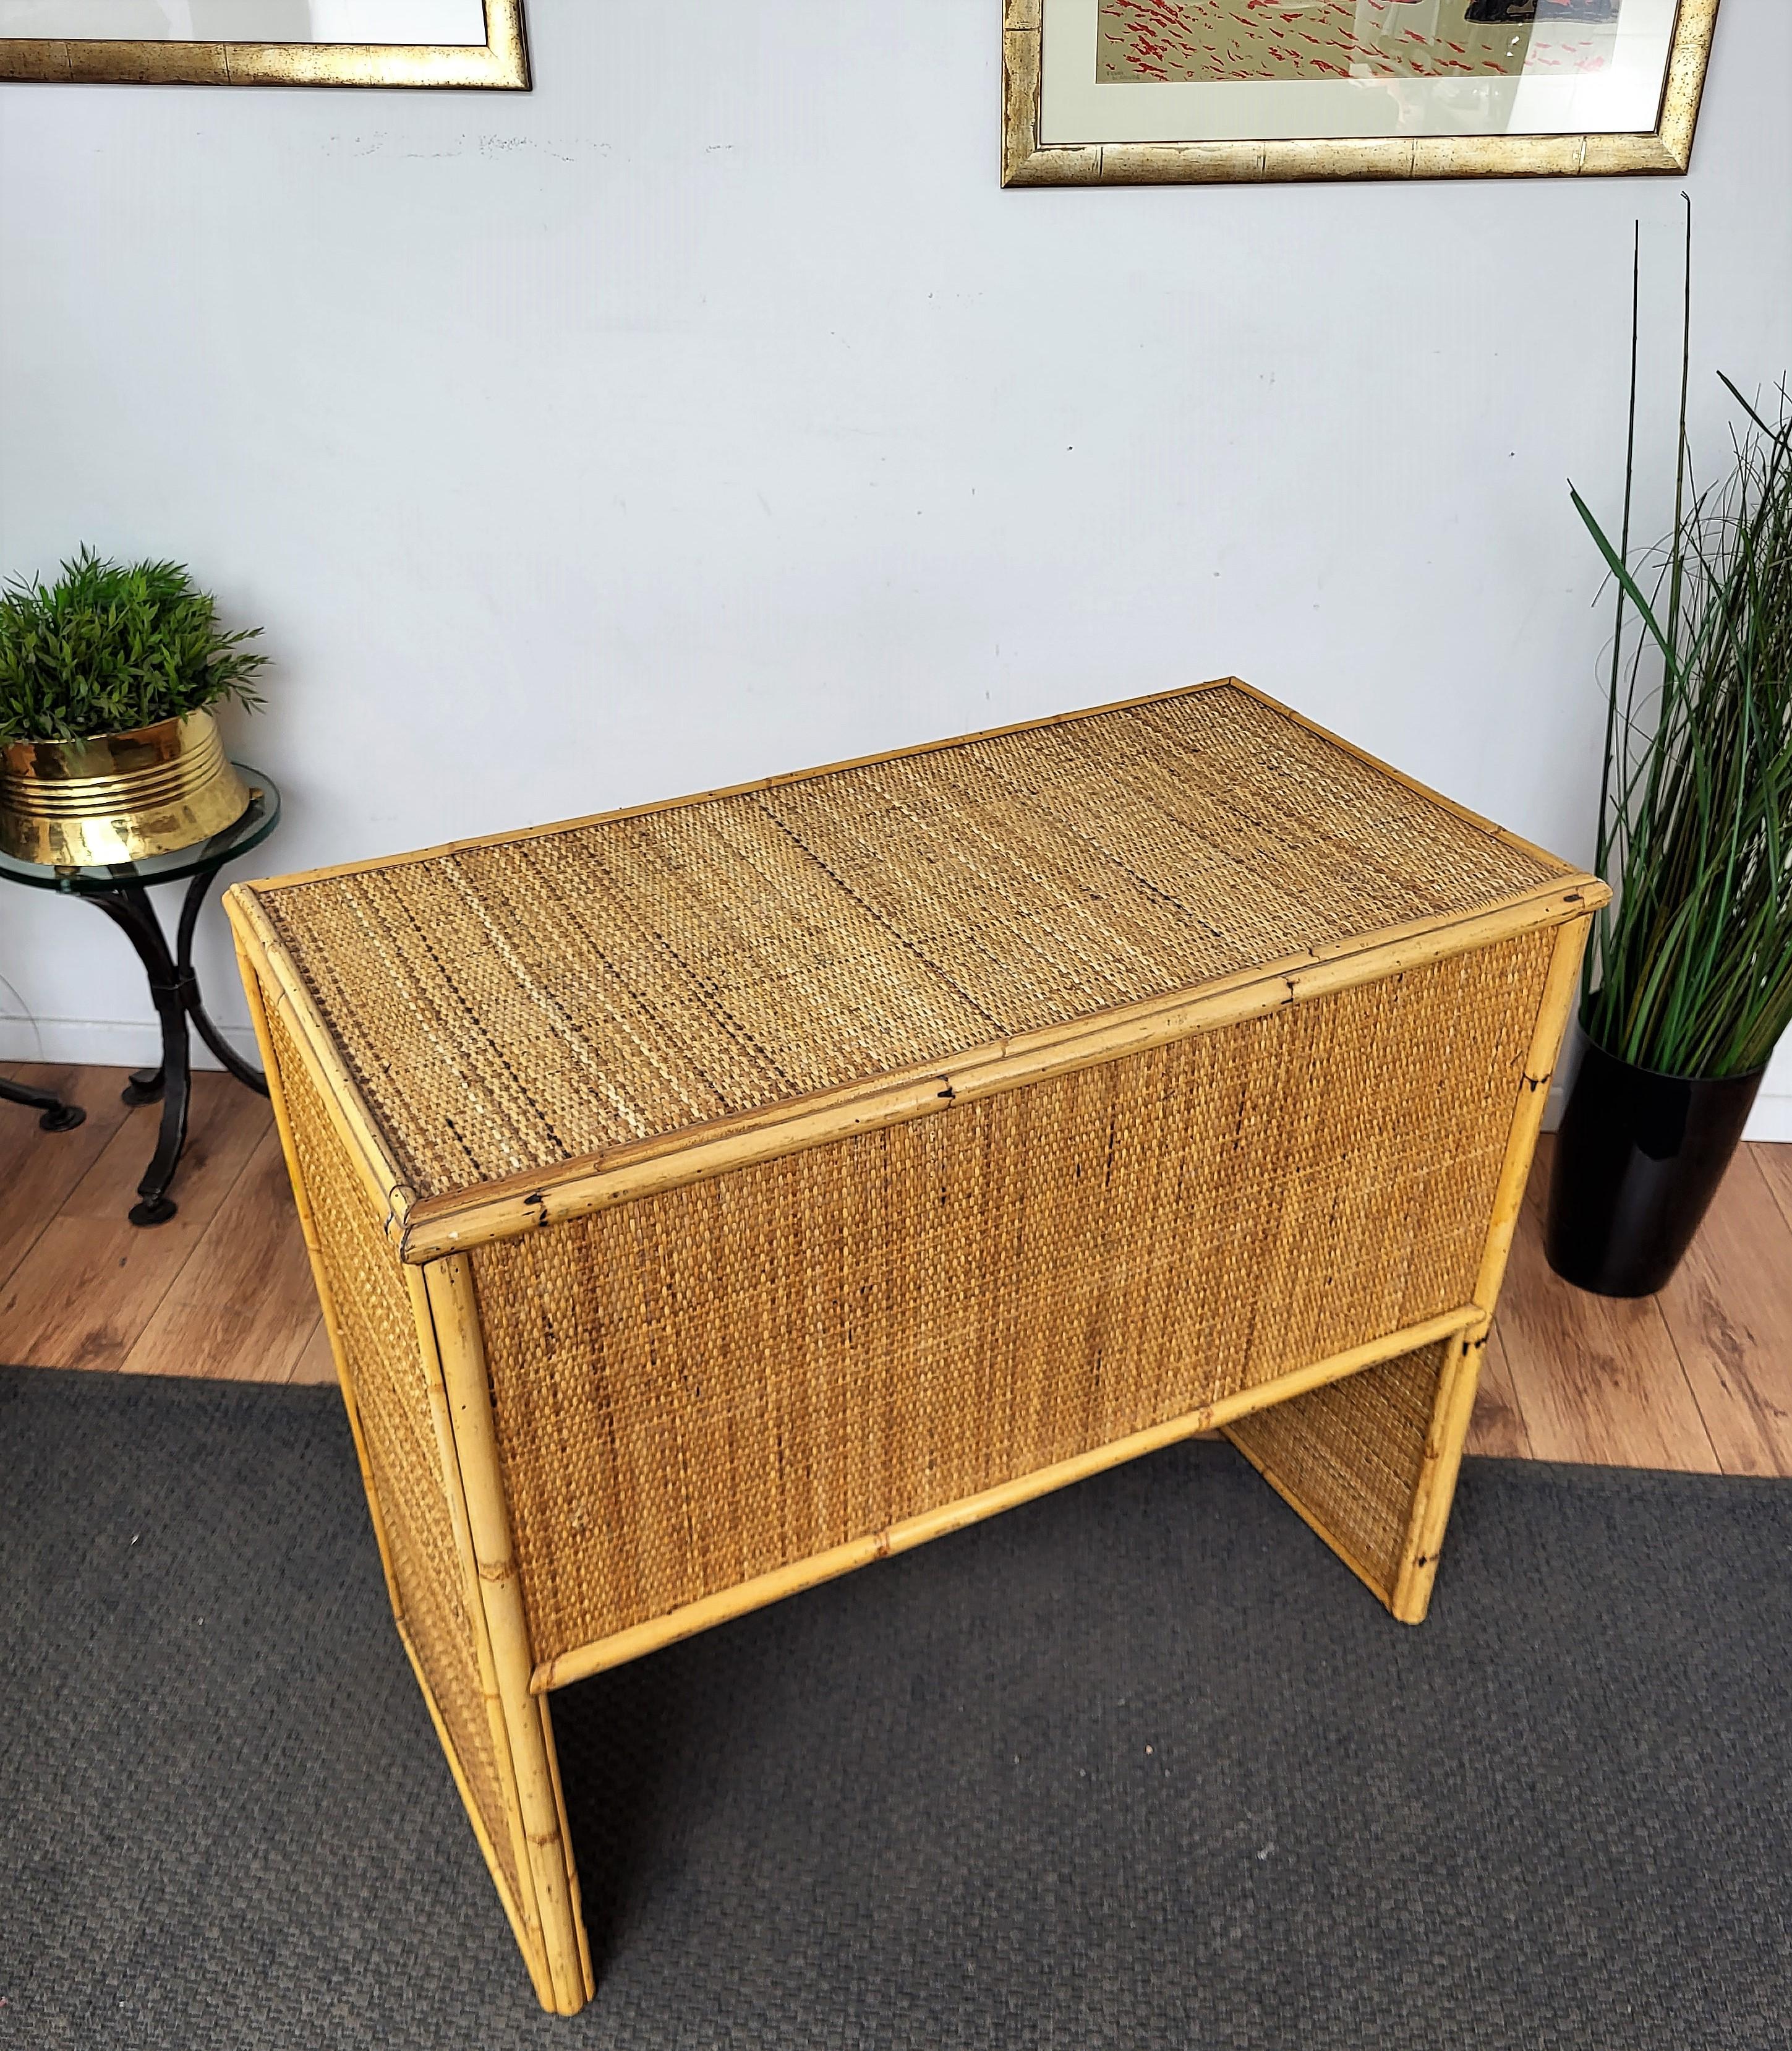 French Provincial Mid-Century Bamboo, Wood and Rattan Writing Table Desk with Drawers, Italy 1970s For Sale